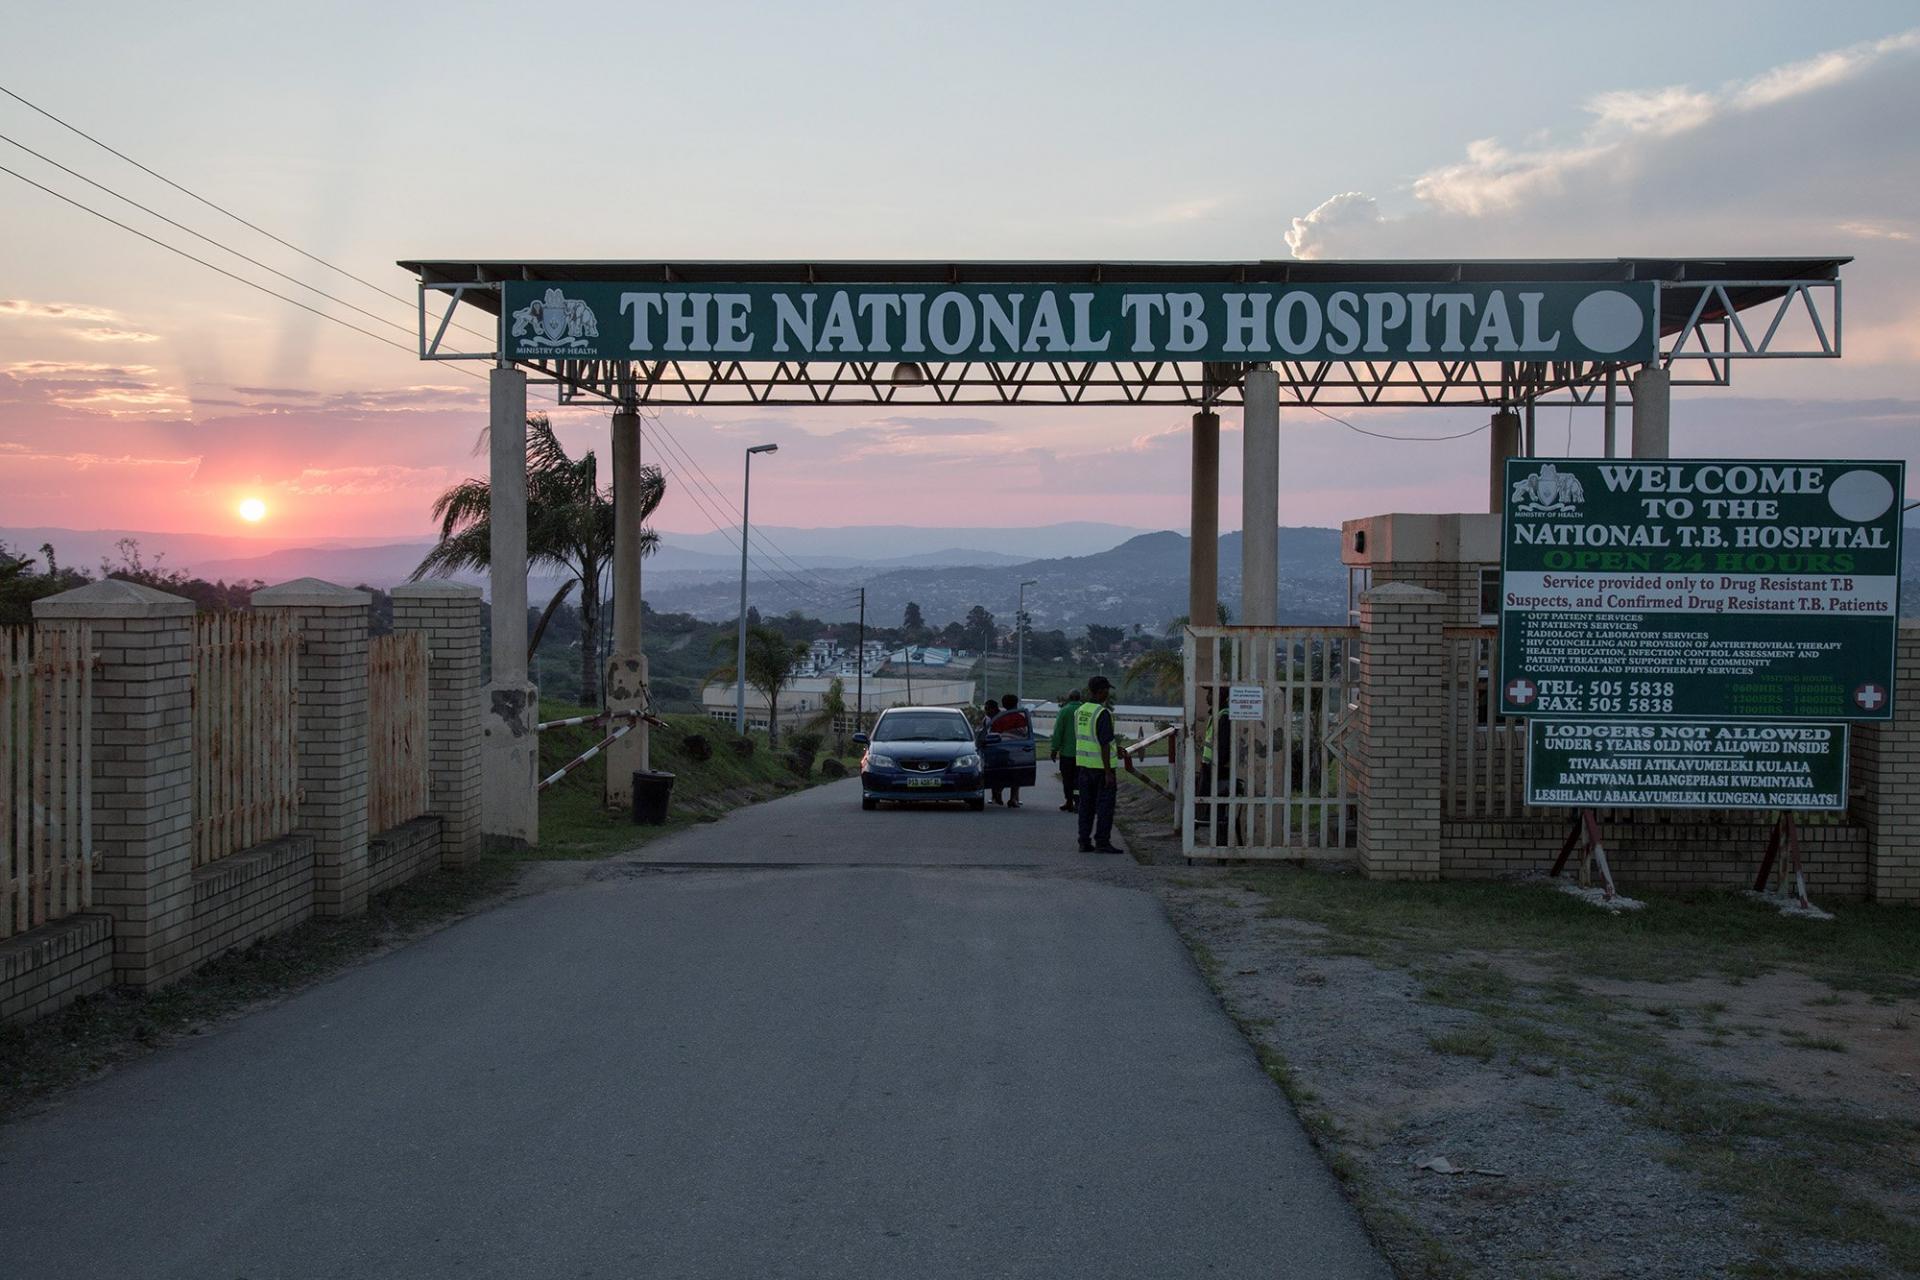 MSF, Doctors Without Borders, Swaziland, TB